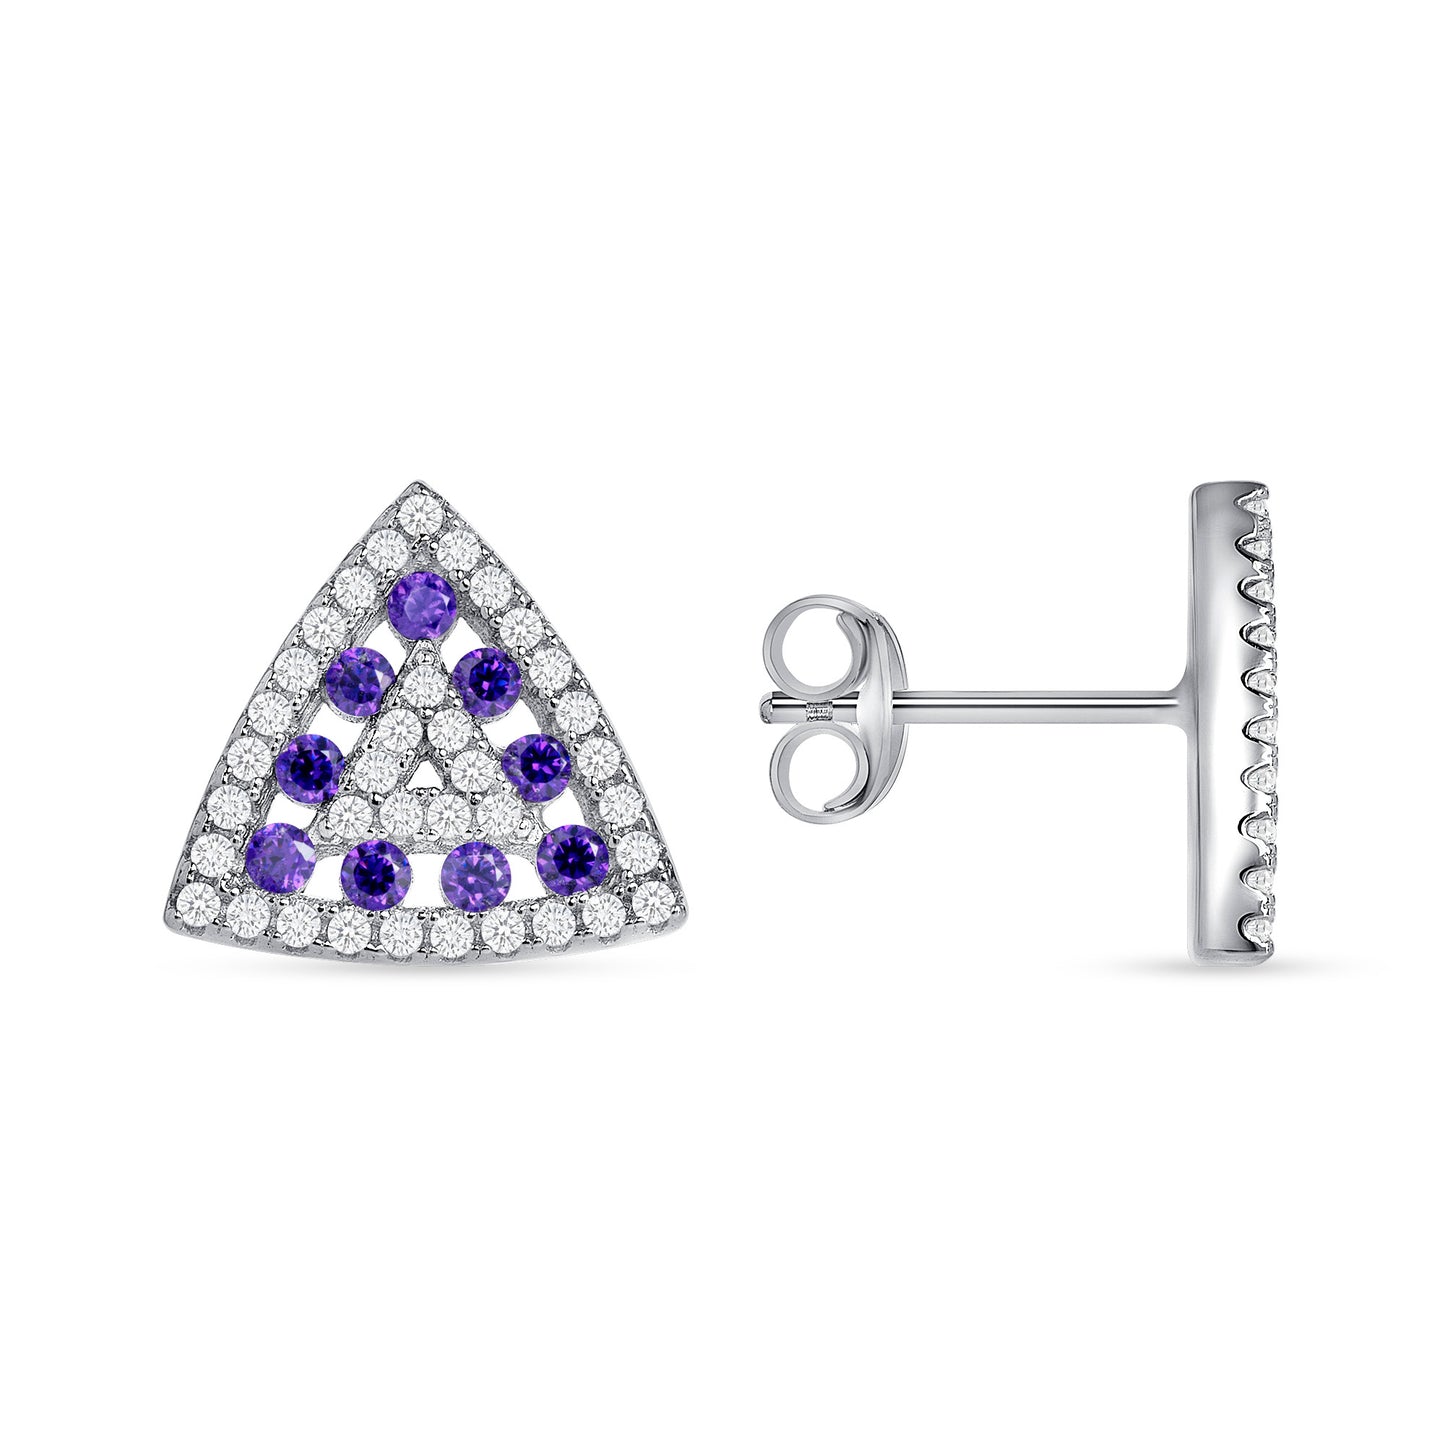 Silver 925 Rhodium Plated Triangle Shape Amethyst Violet Cubic Zirconia Set. SETDGN1300AMY